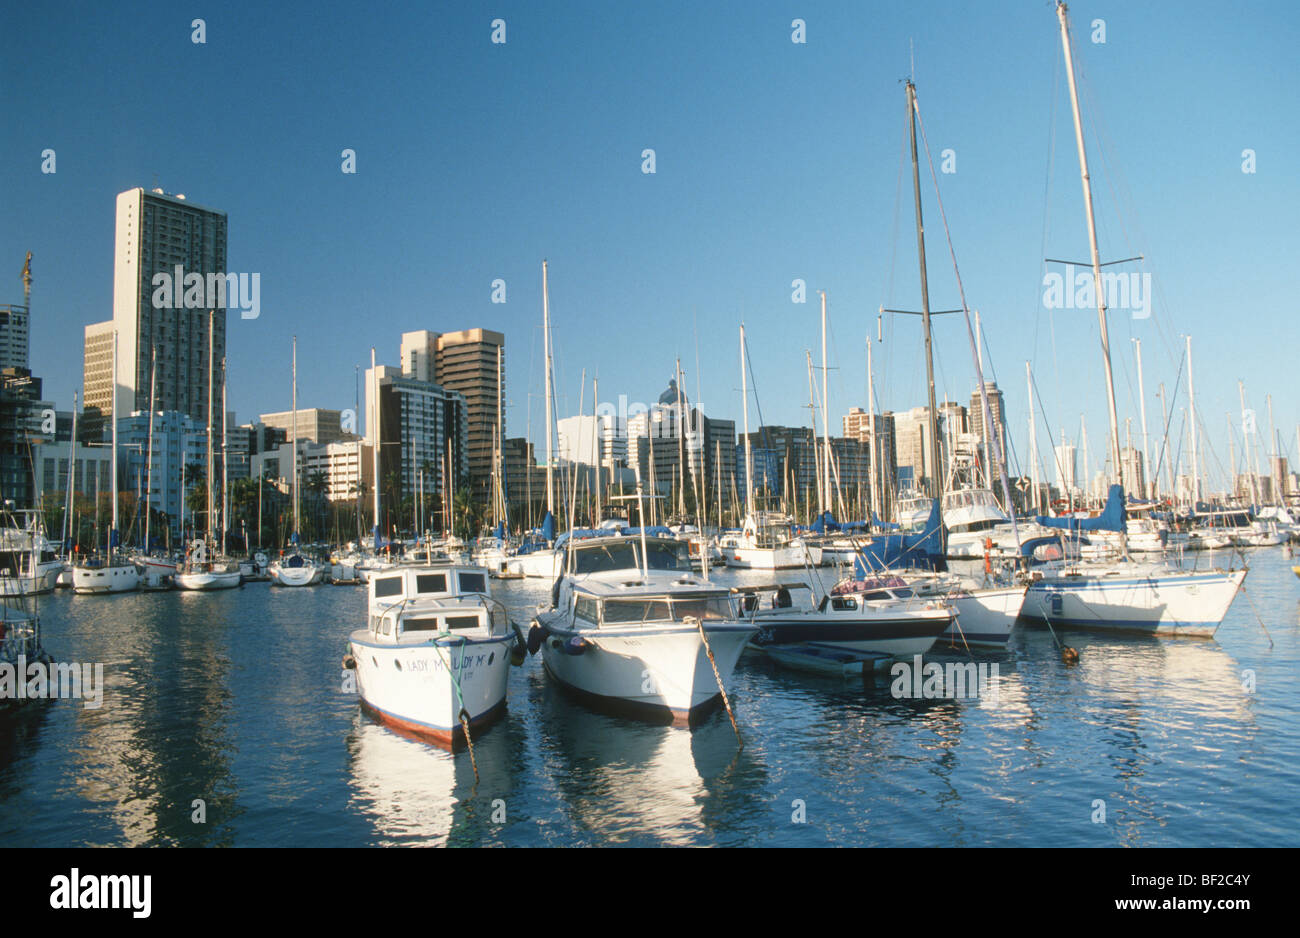 View of Point Yacht Club, Durban, KwaZulu-Natal Province, South Africa Stock Photo